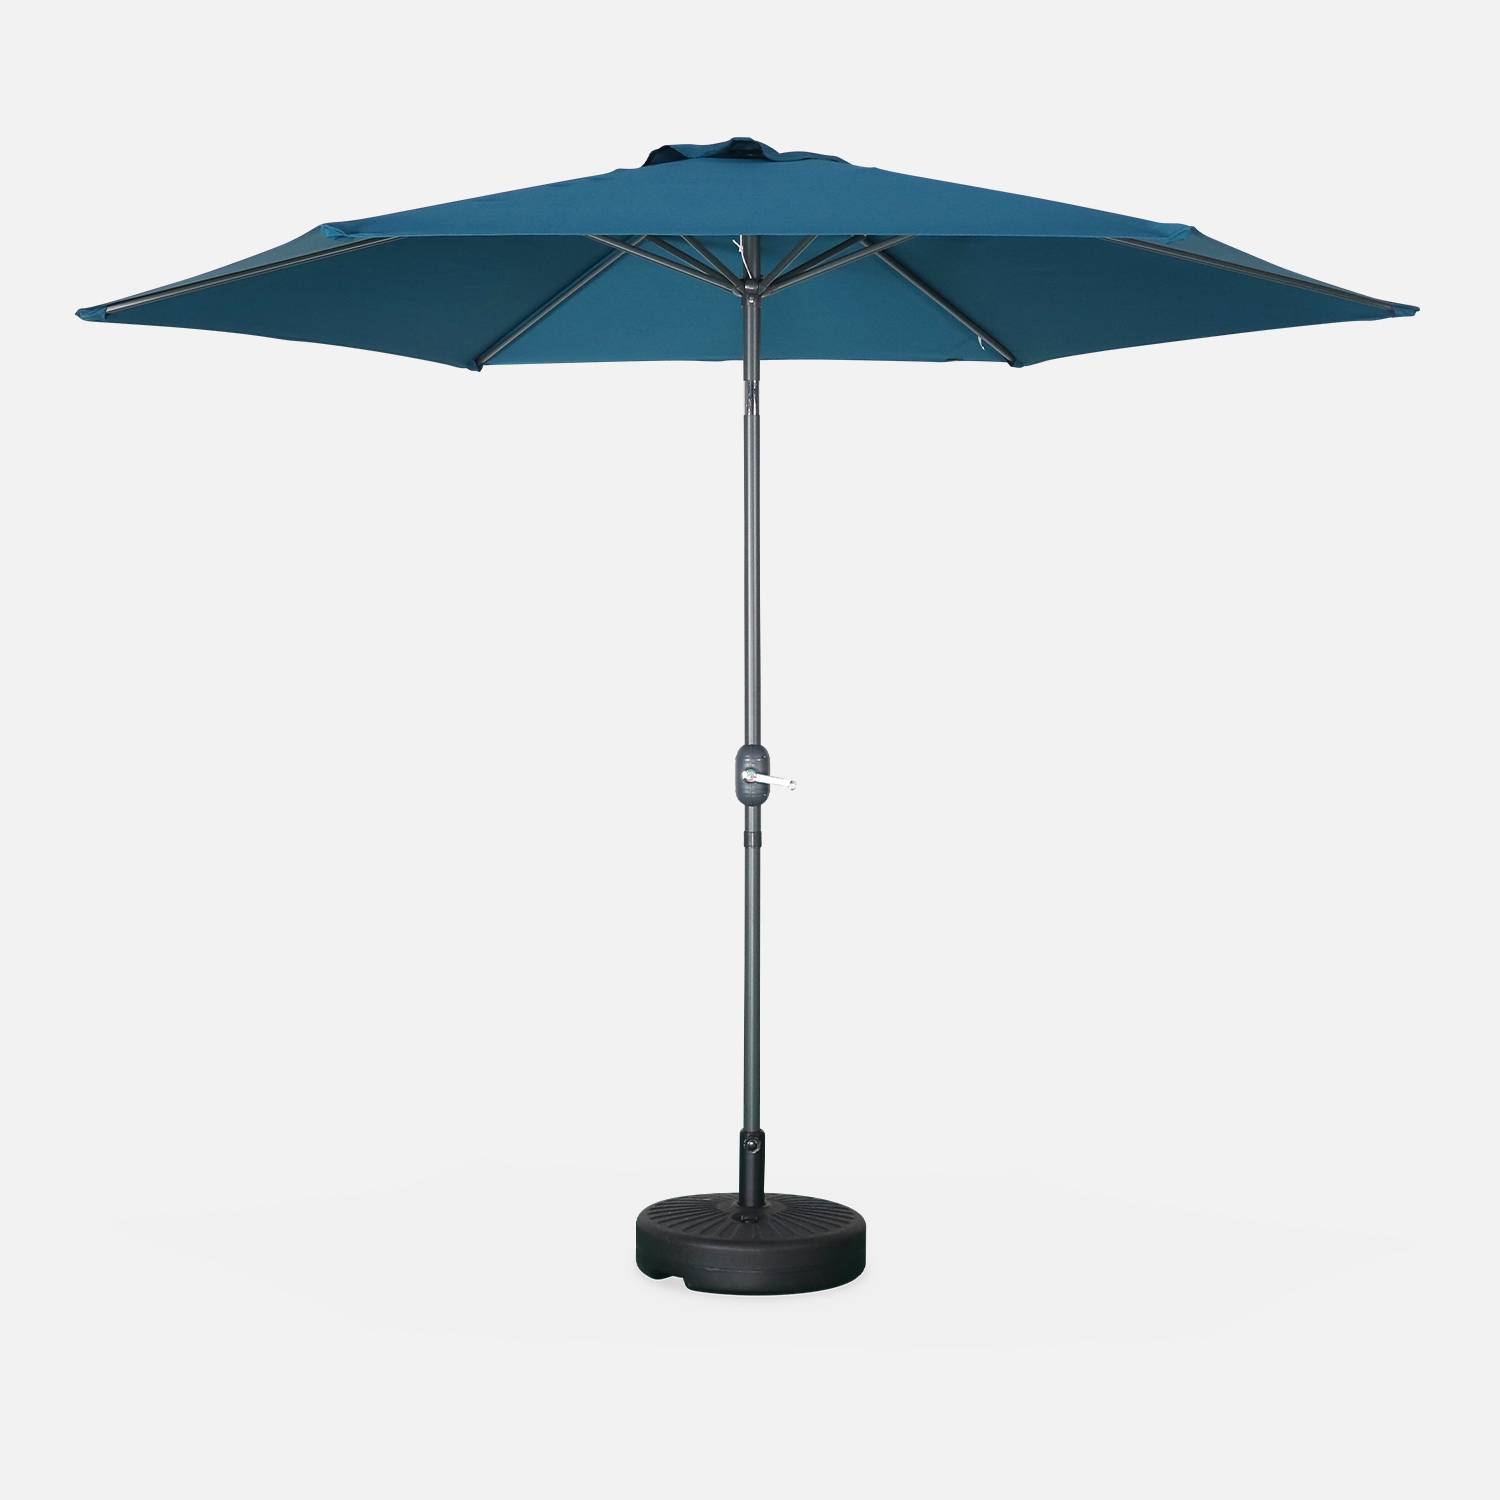 Stokparasol TOUQUET - ⌀295cm - Rond - Donker turquoise | sweeek